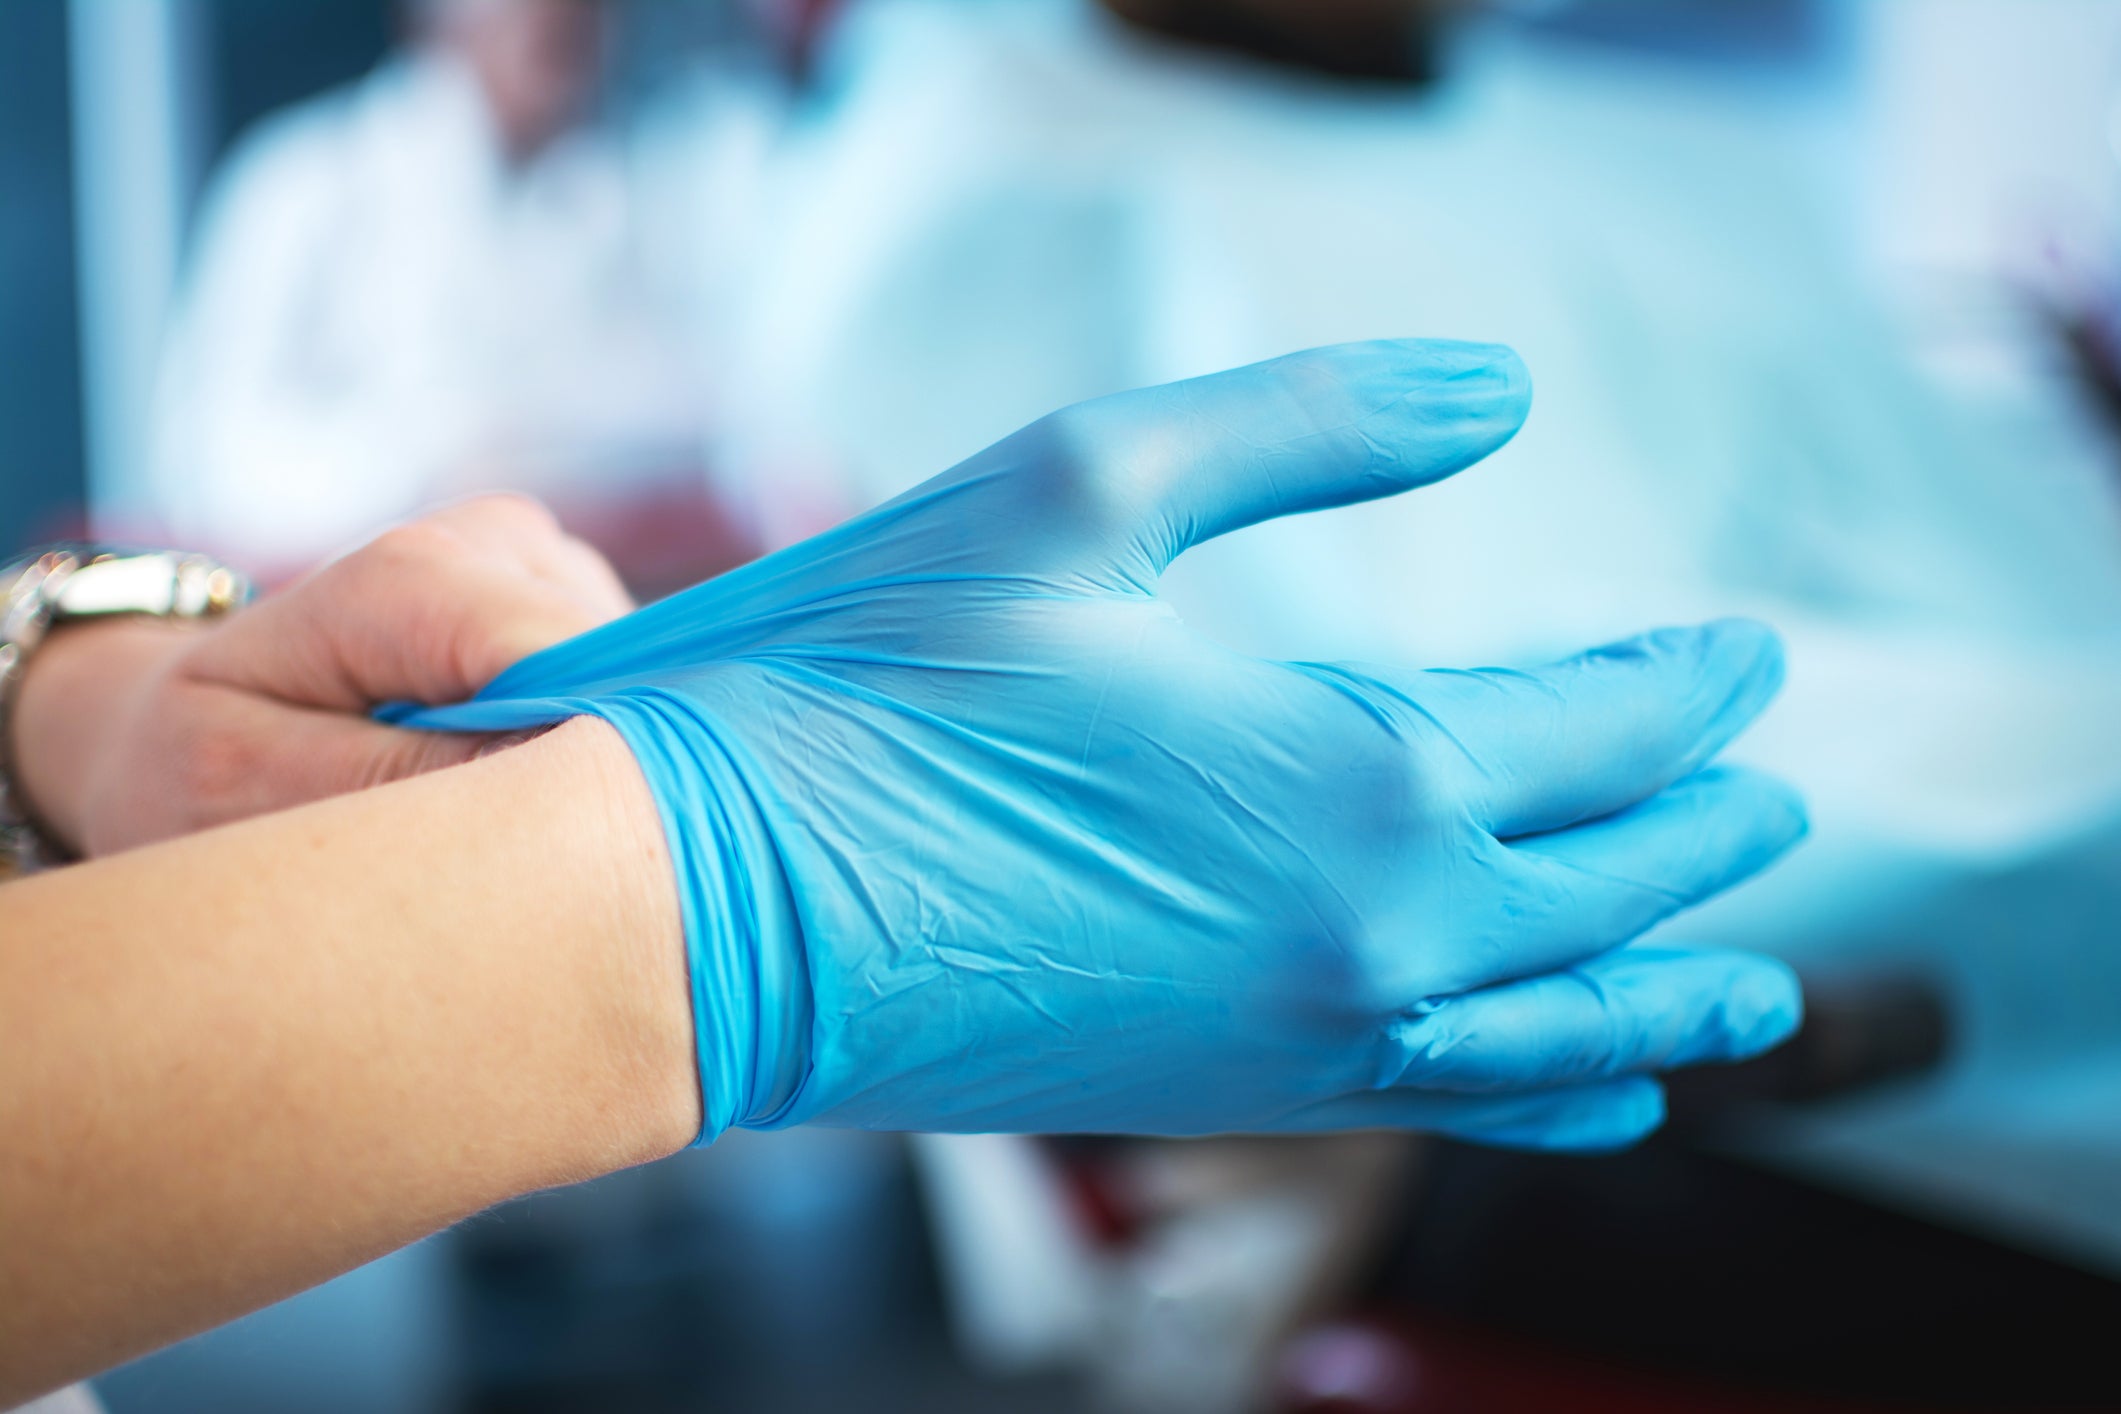 Female doctor's hands putting on blue sterilized surgical gloves.